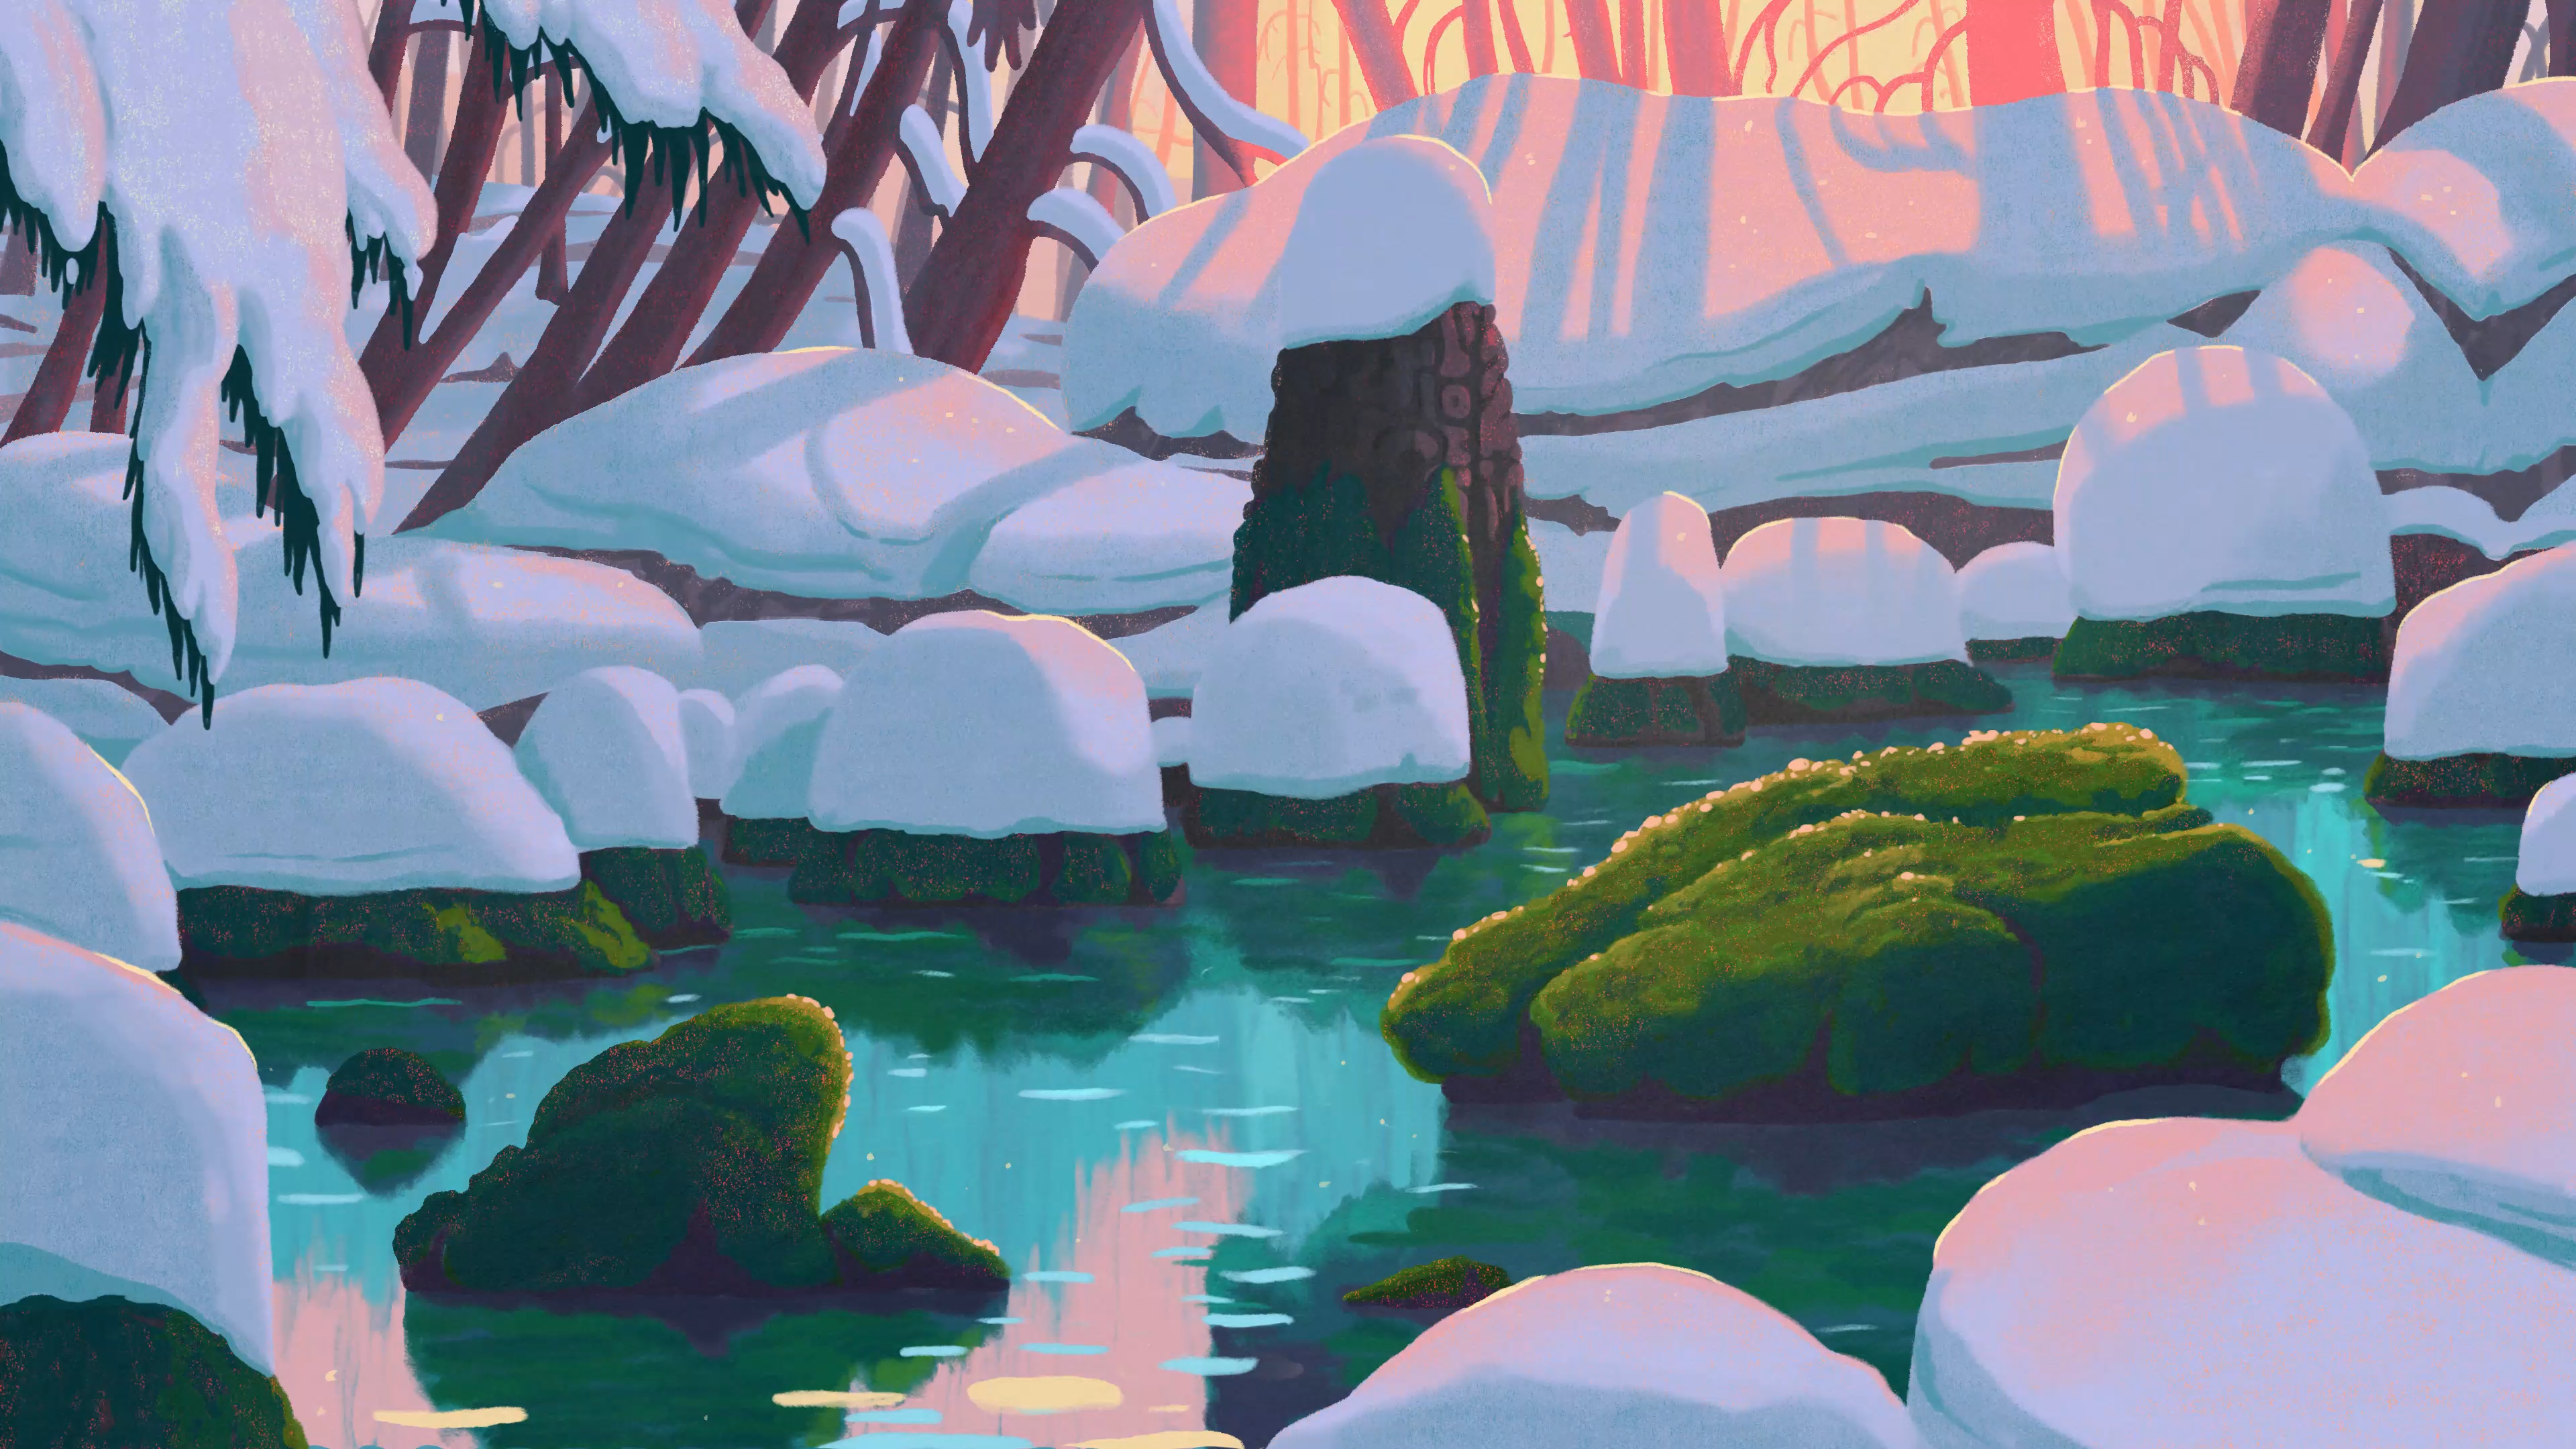 Water Snow Trees Rocks Moss Sean Lewis Lake Forest Sunset 3840x2160